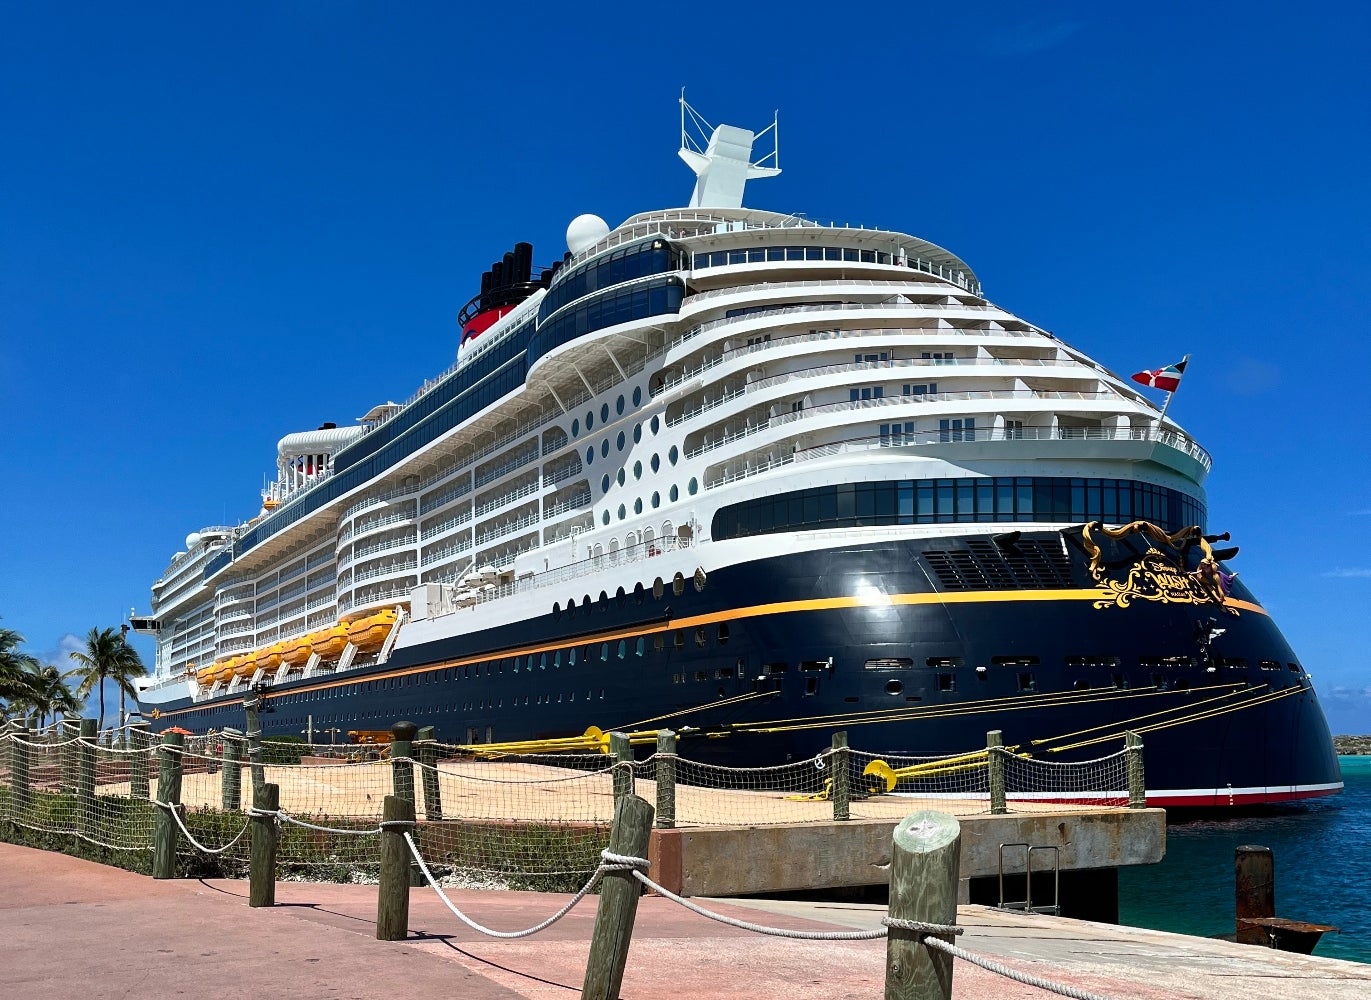 Disney's Newest Cruise Ship, The Wish, Literally Has Something For